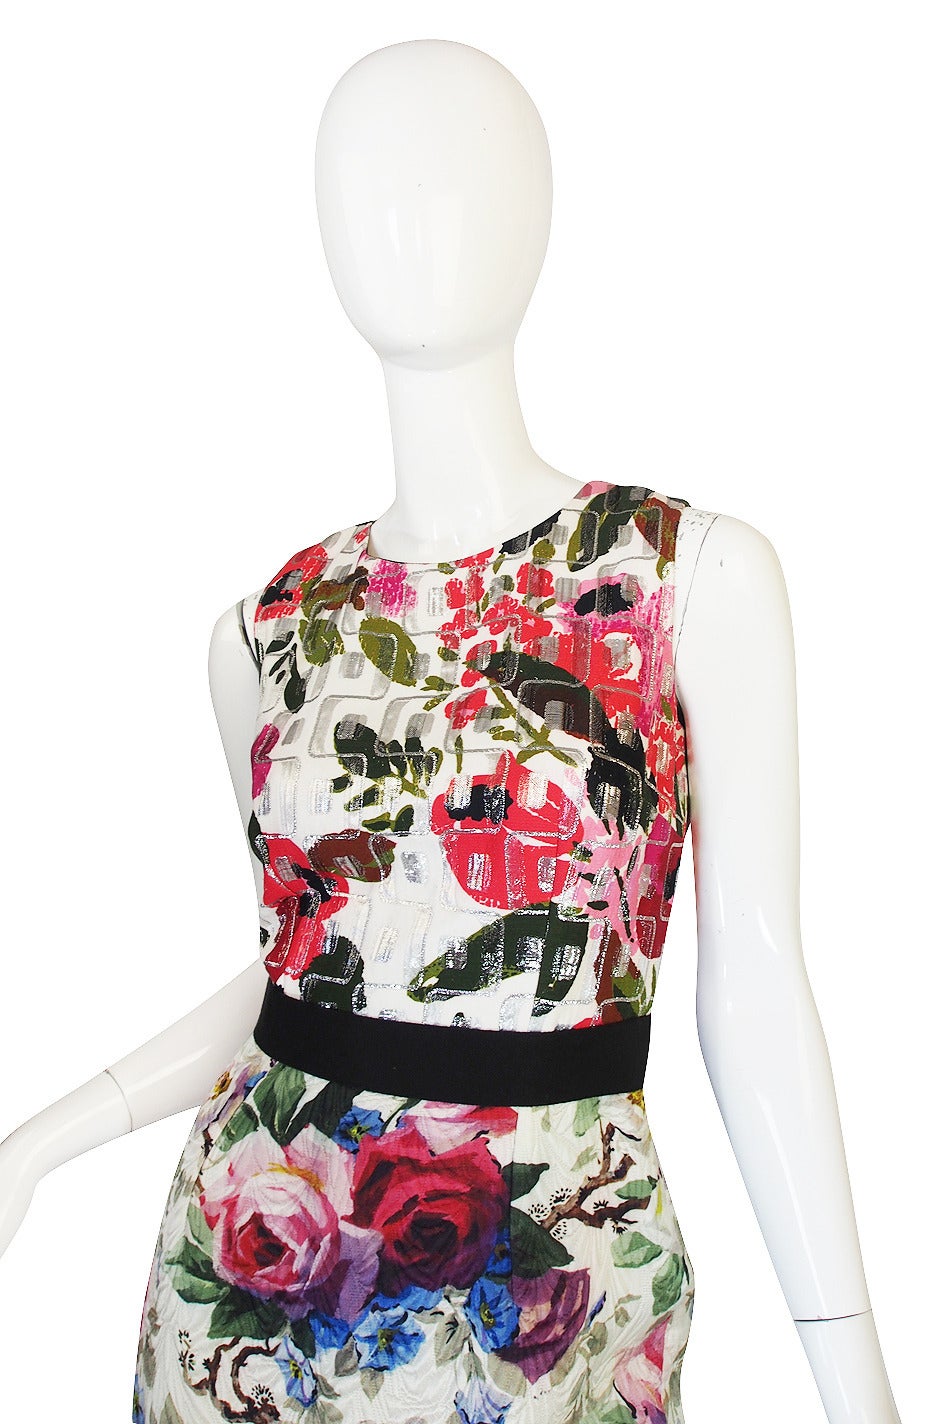 Women's Recent Dolce & Gabbana Fitted Floral & Metallic Dress For Sale